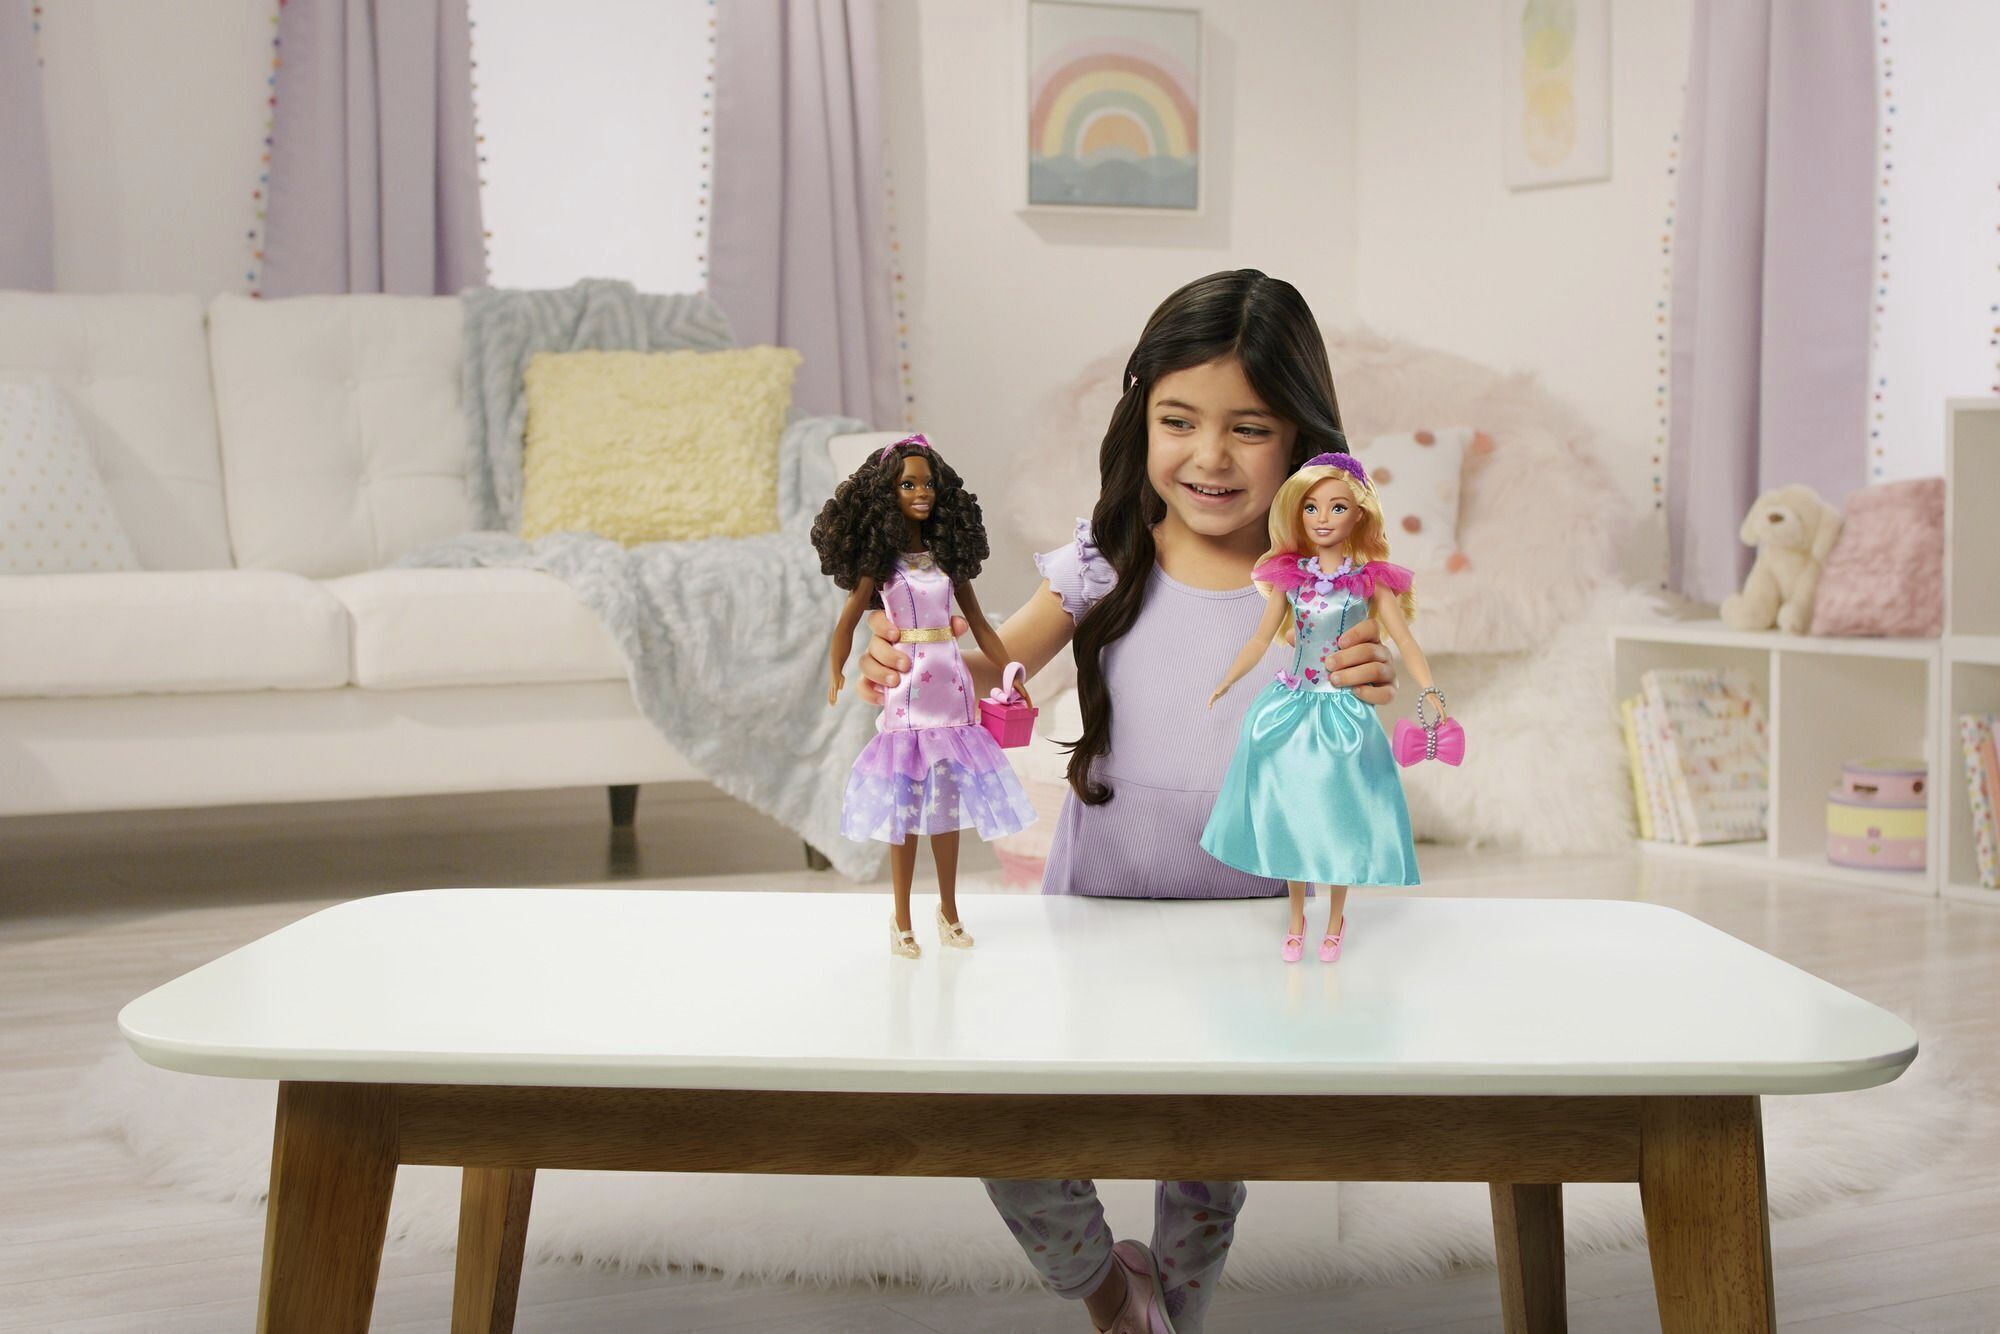 The testimonies are repeated: girls who played with dolls, happy childhoods, problematic adolescences (Mattel via AP)